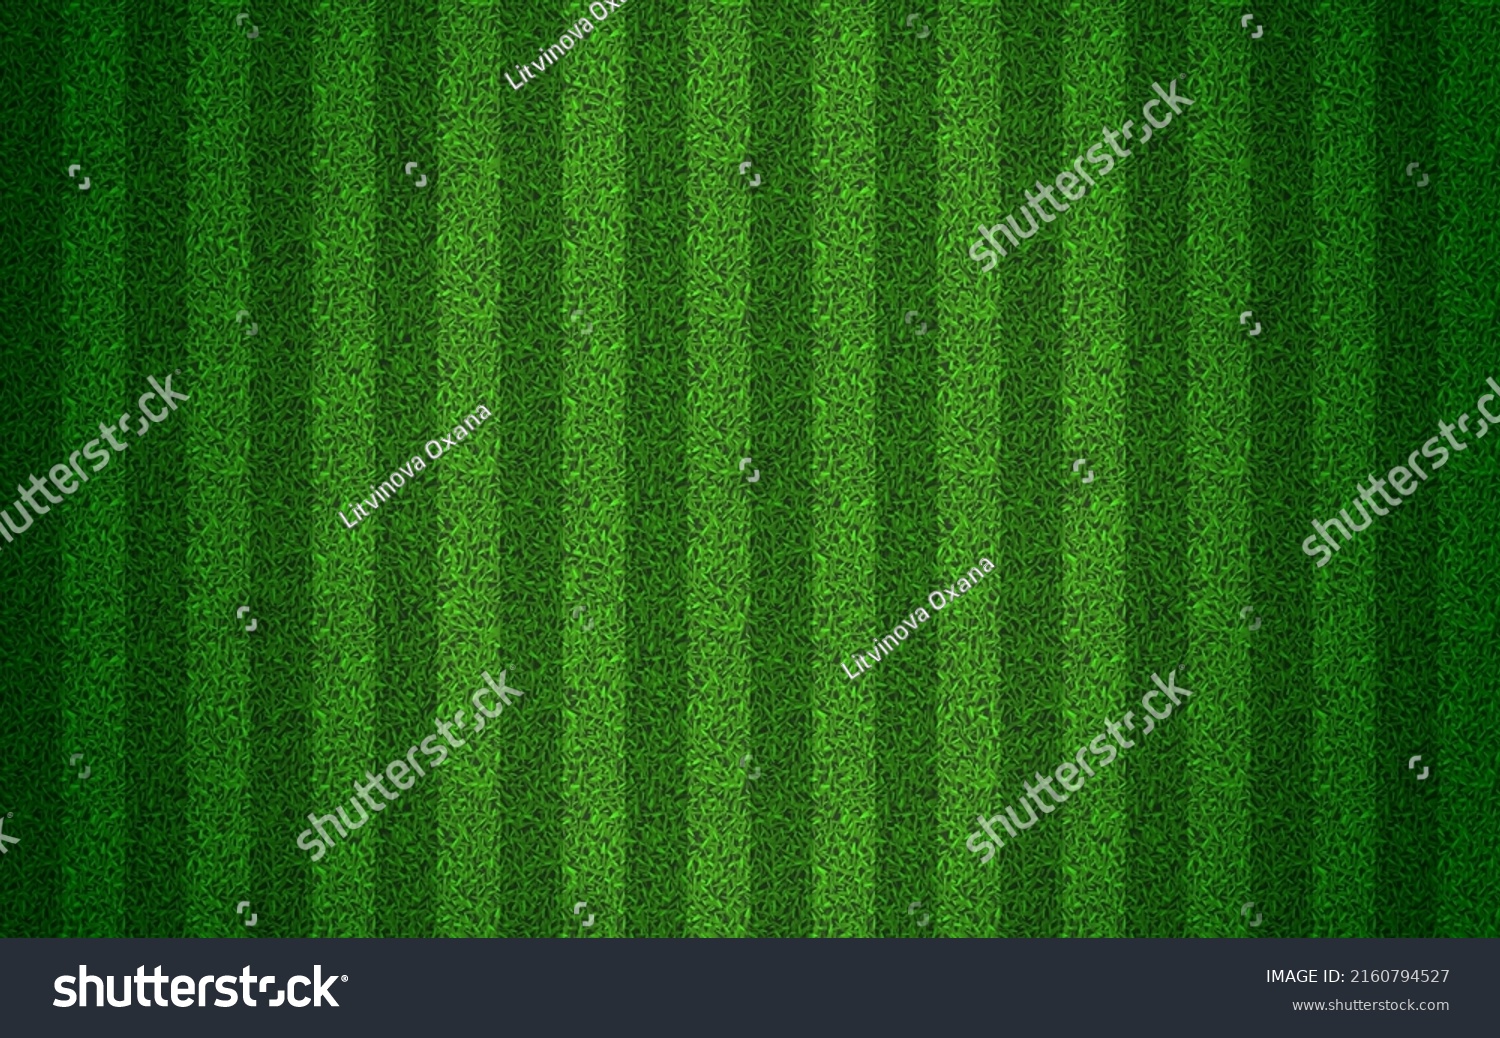 Green grass seamless texture on striped sport field. Astro turf pattern. Carpet or lawn top view. Vector background. Baseball, soccer, football or golf game. Fake plastic or fresh ground for game play #2160794527